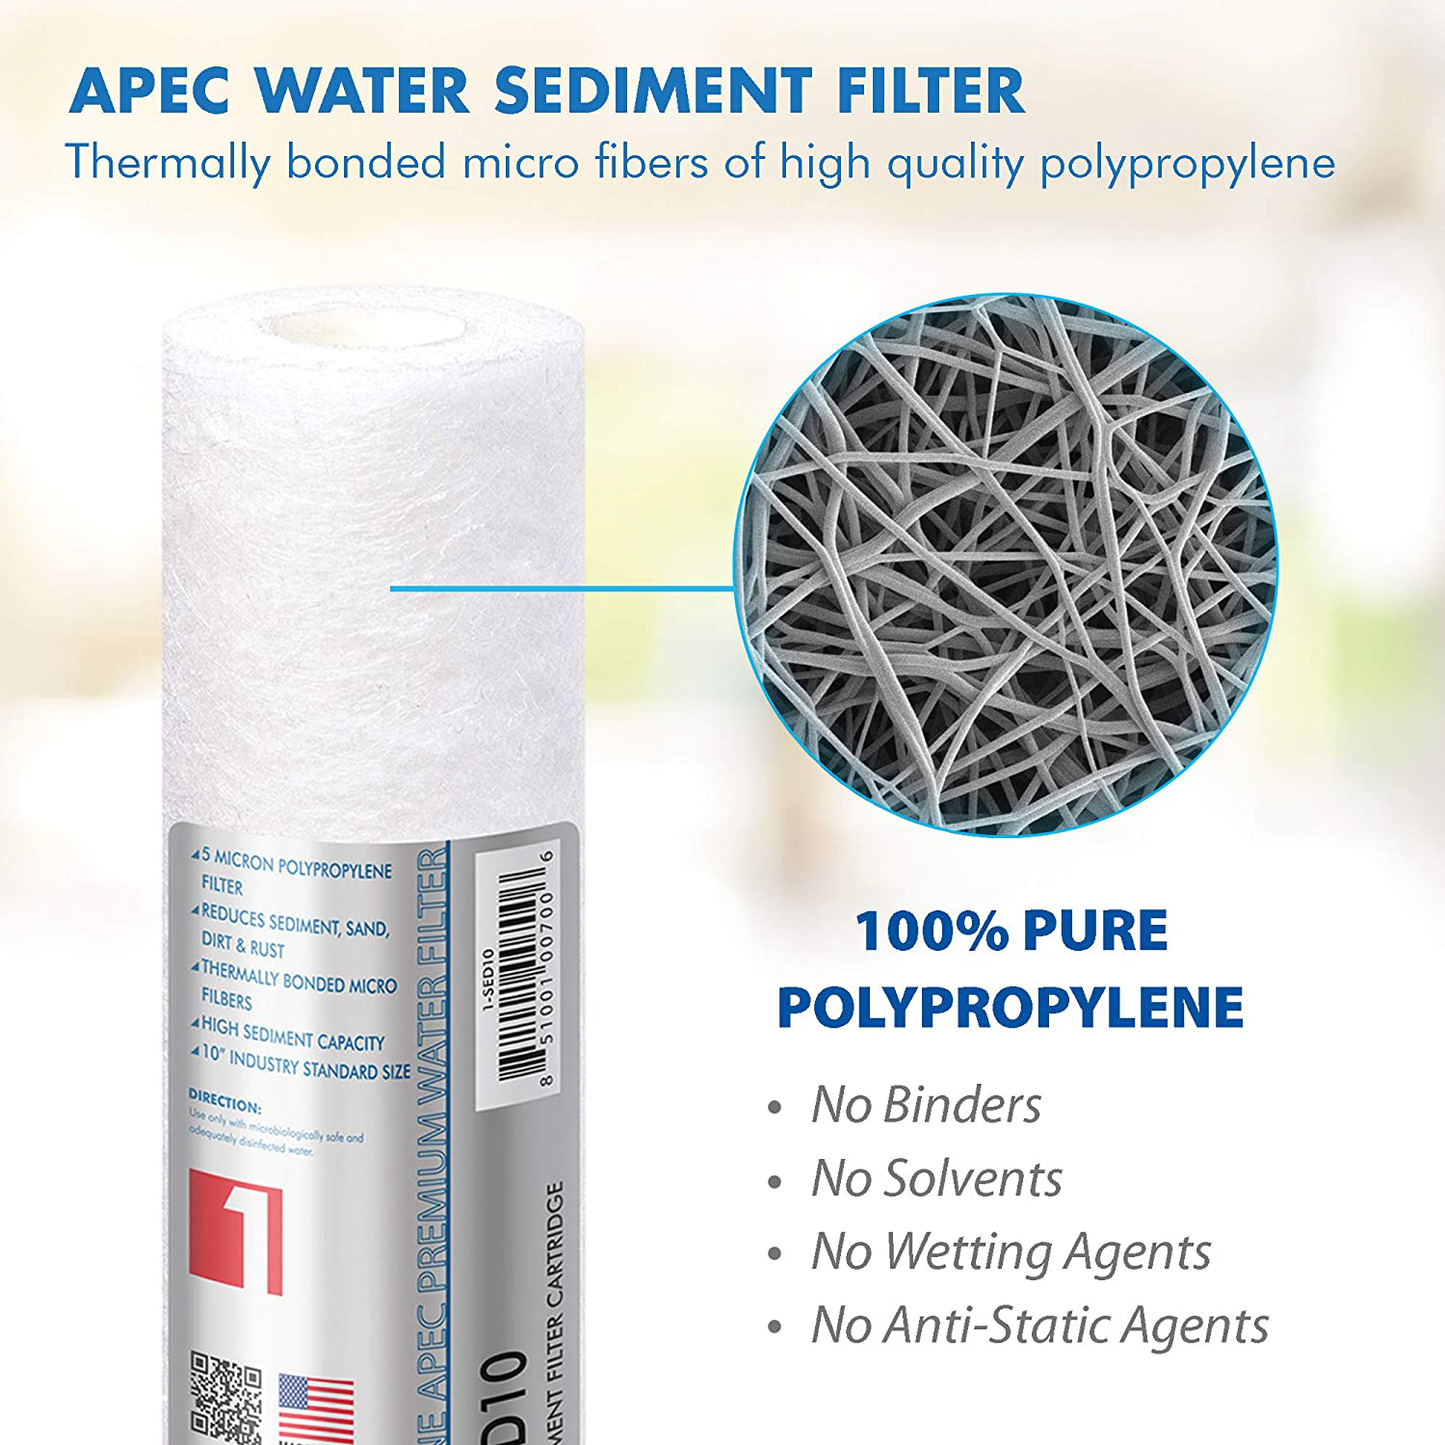 APEC Water Systems Filter-Set US Made Double Capacity Replacement Stage 1-3 for Reverse Osmosis System, White & DE 10" Inline Carbon Filter with ¼” Quick Connect For Reverse Osmosis Filter System